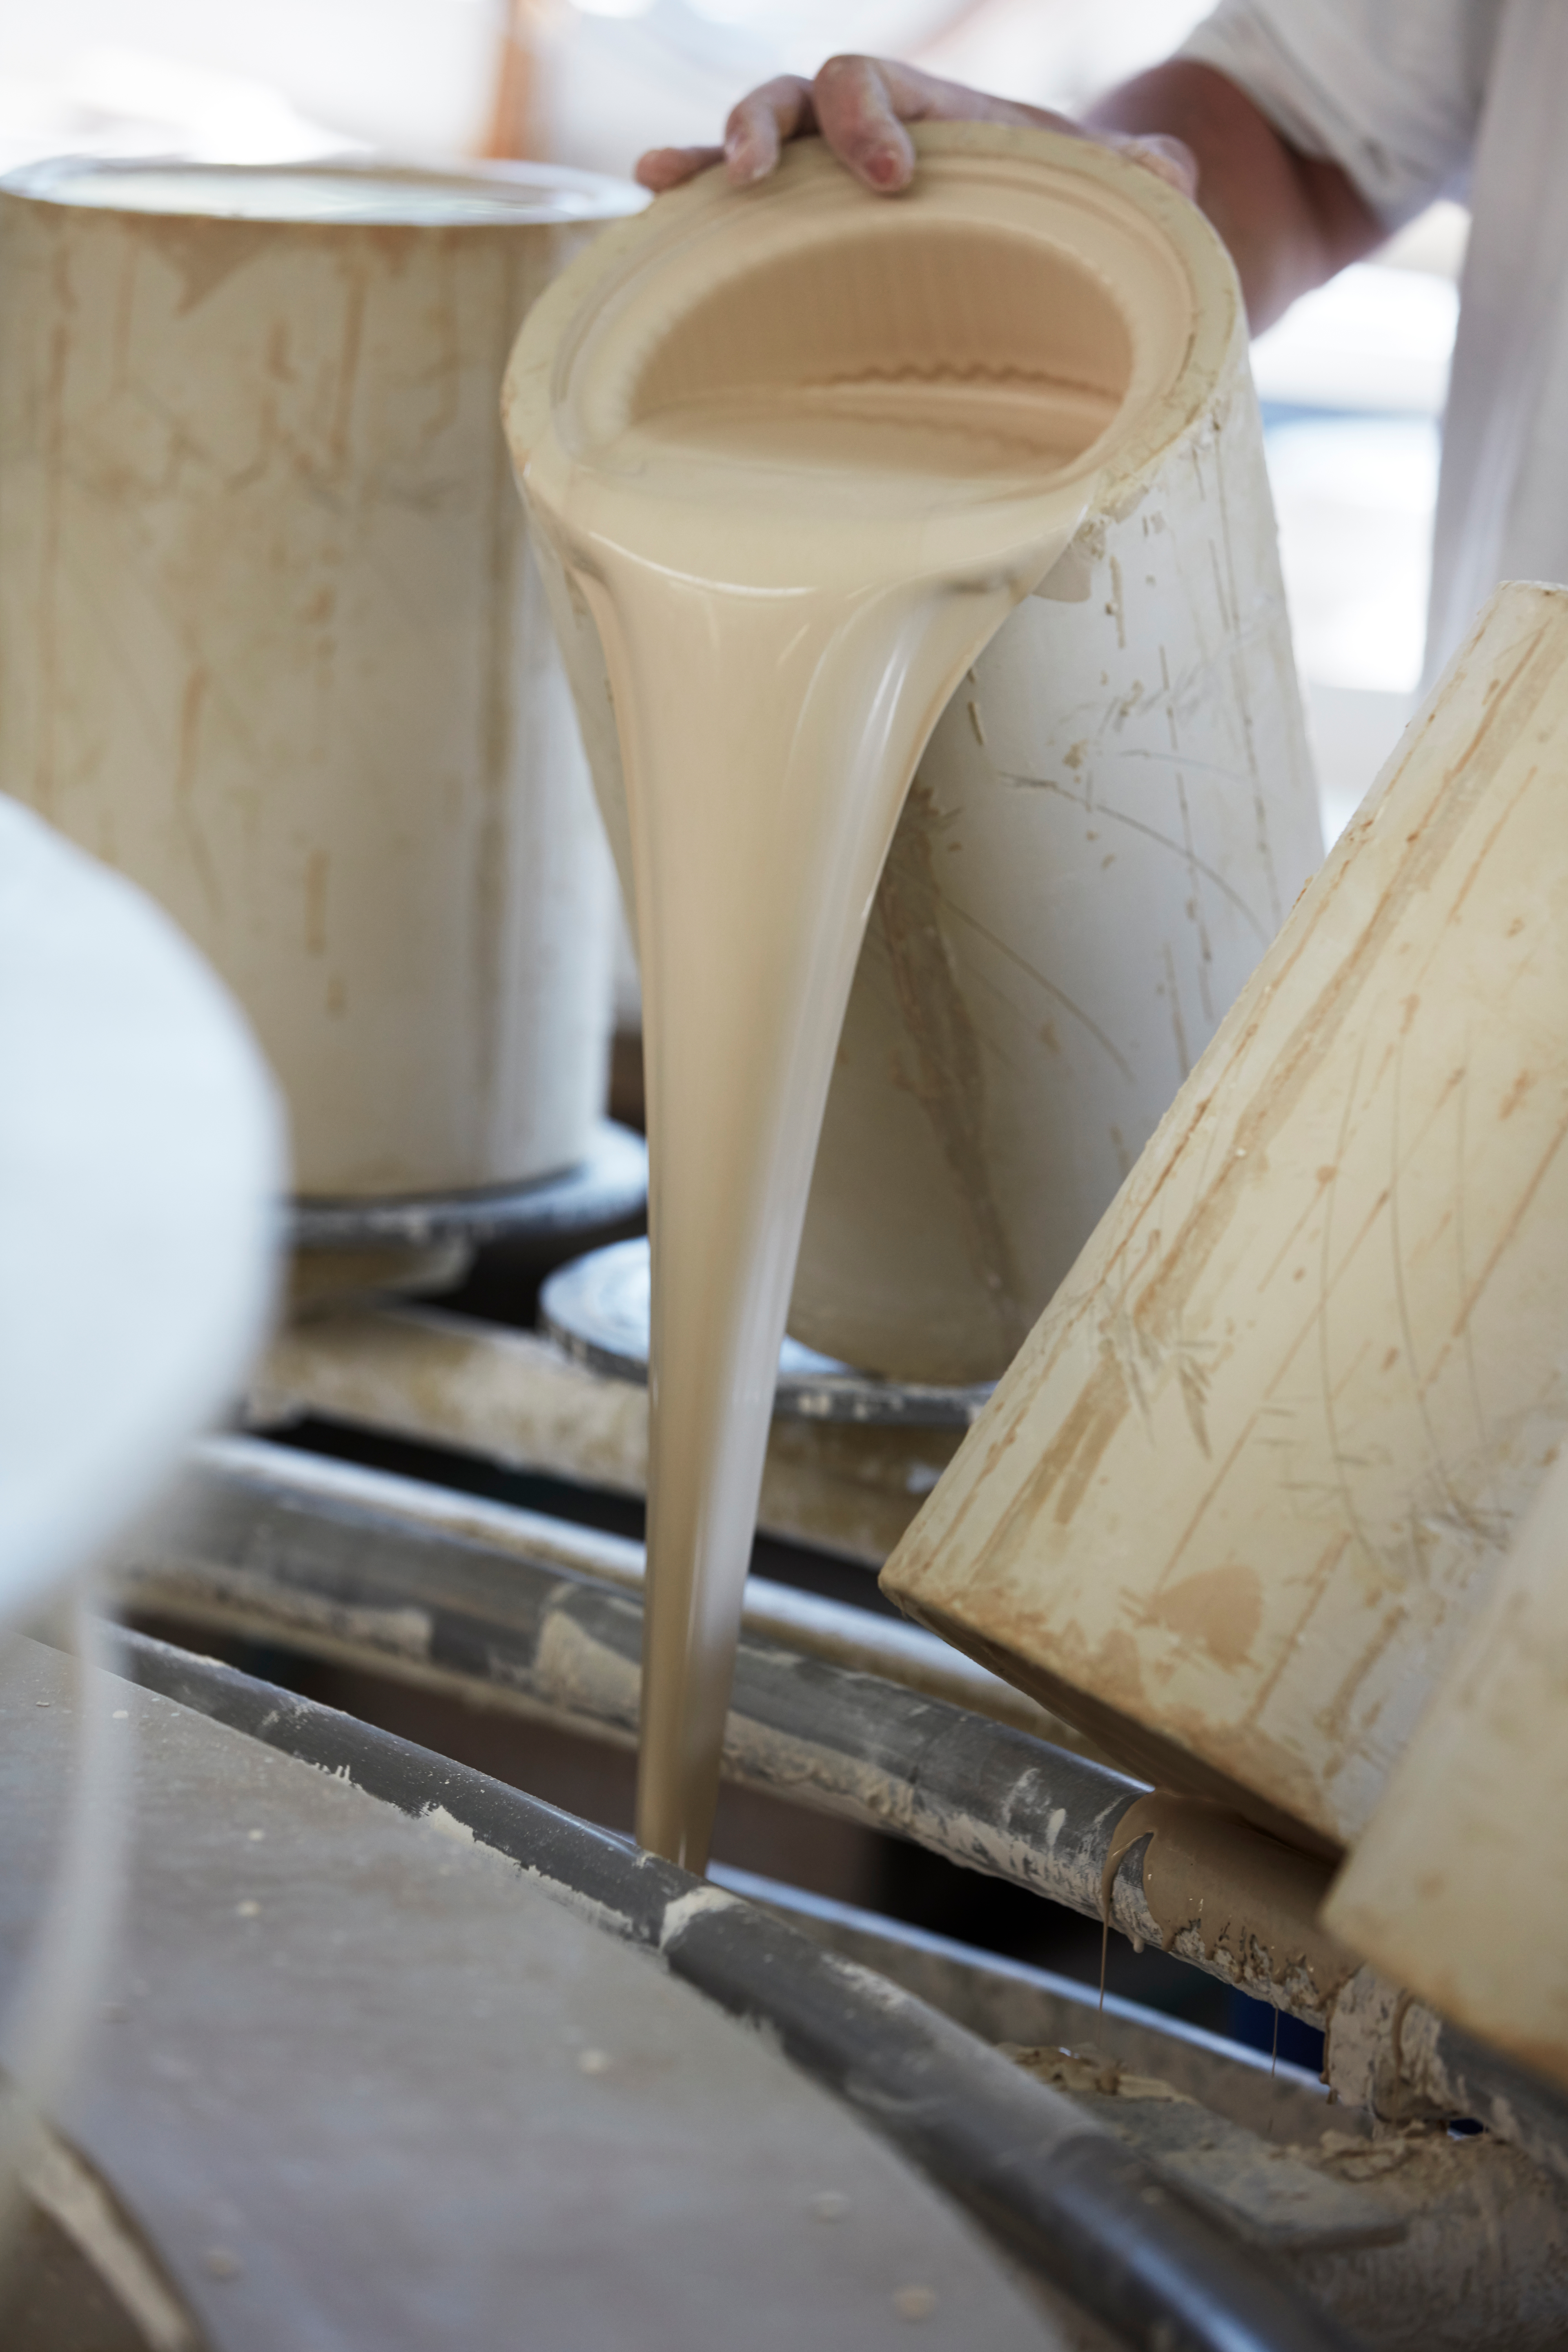 The classic Lyngby vase from Lyngby Porcelæn is being cast